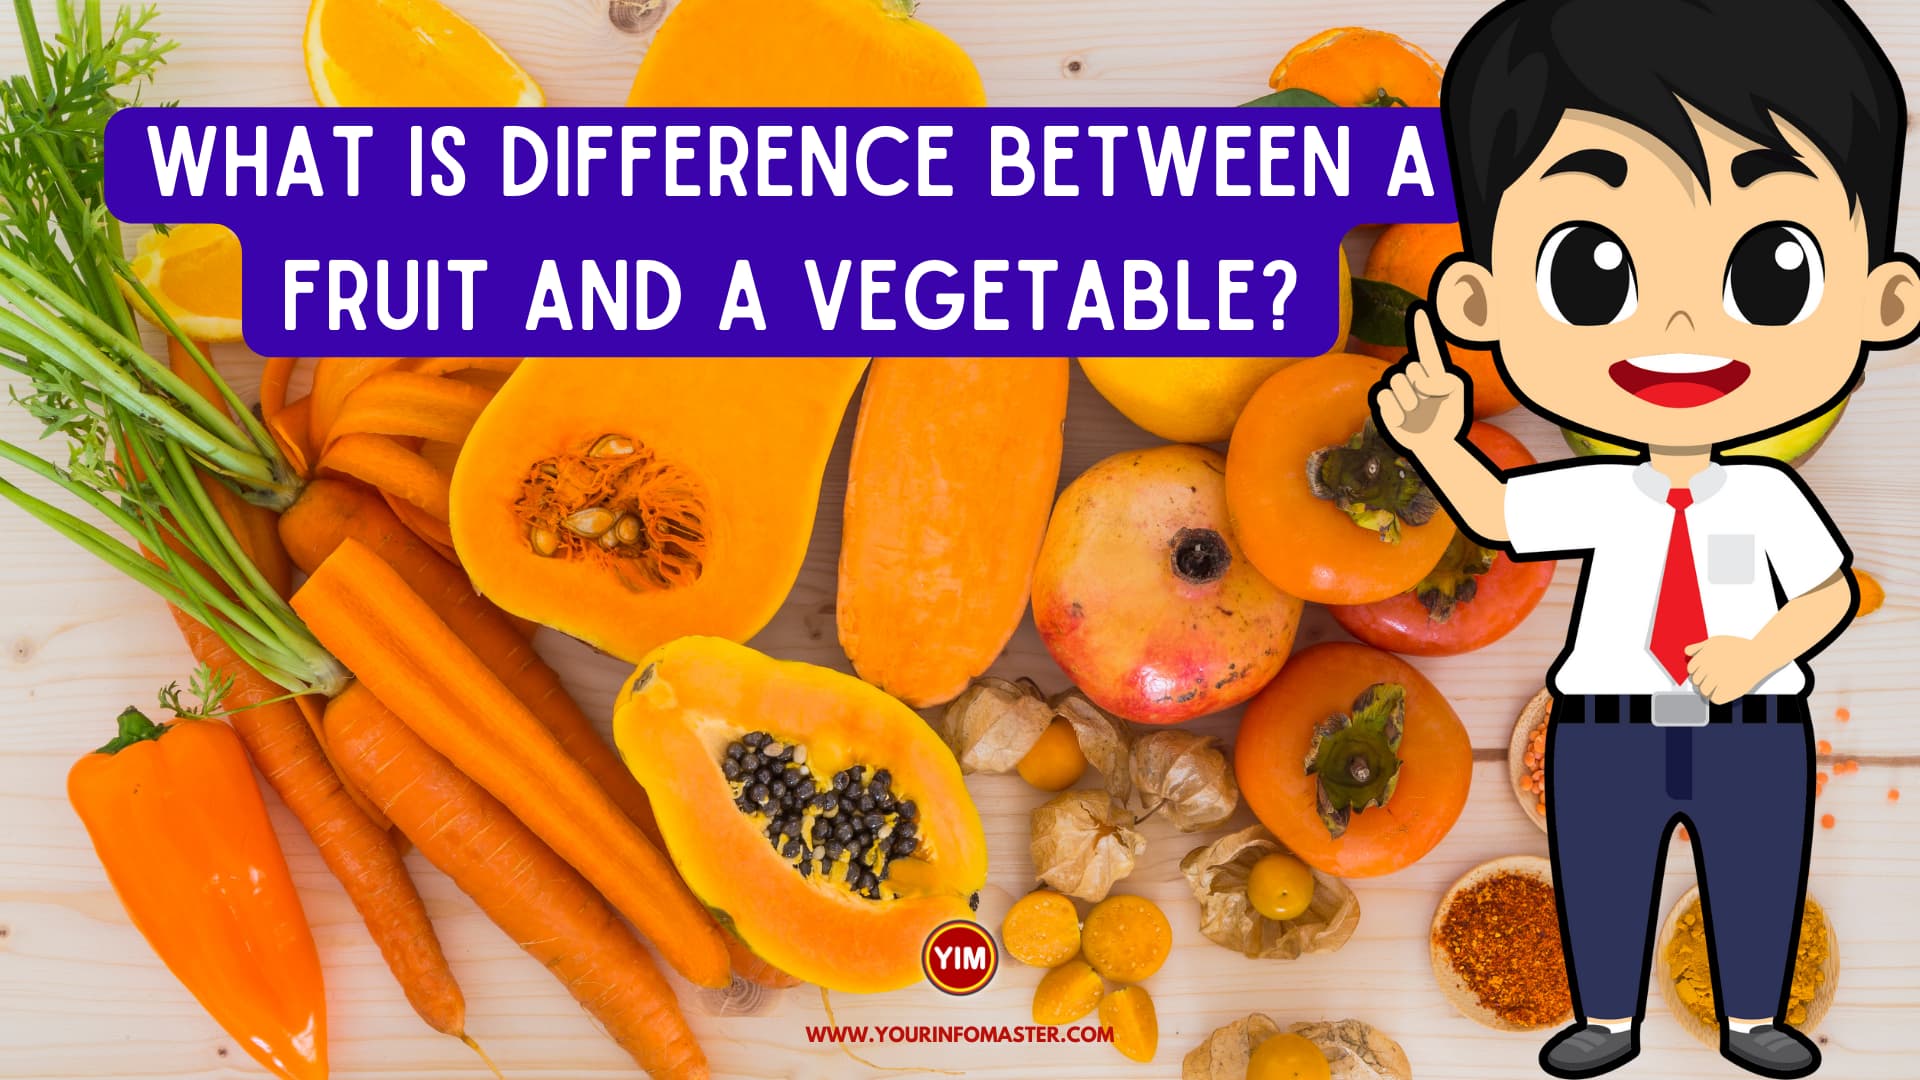 What is difference between a fruit and a vegetable